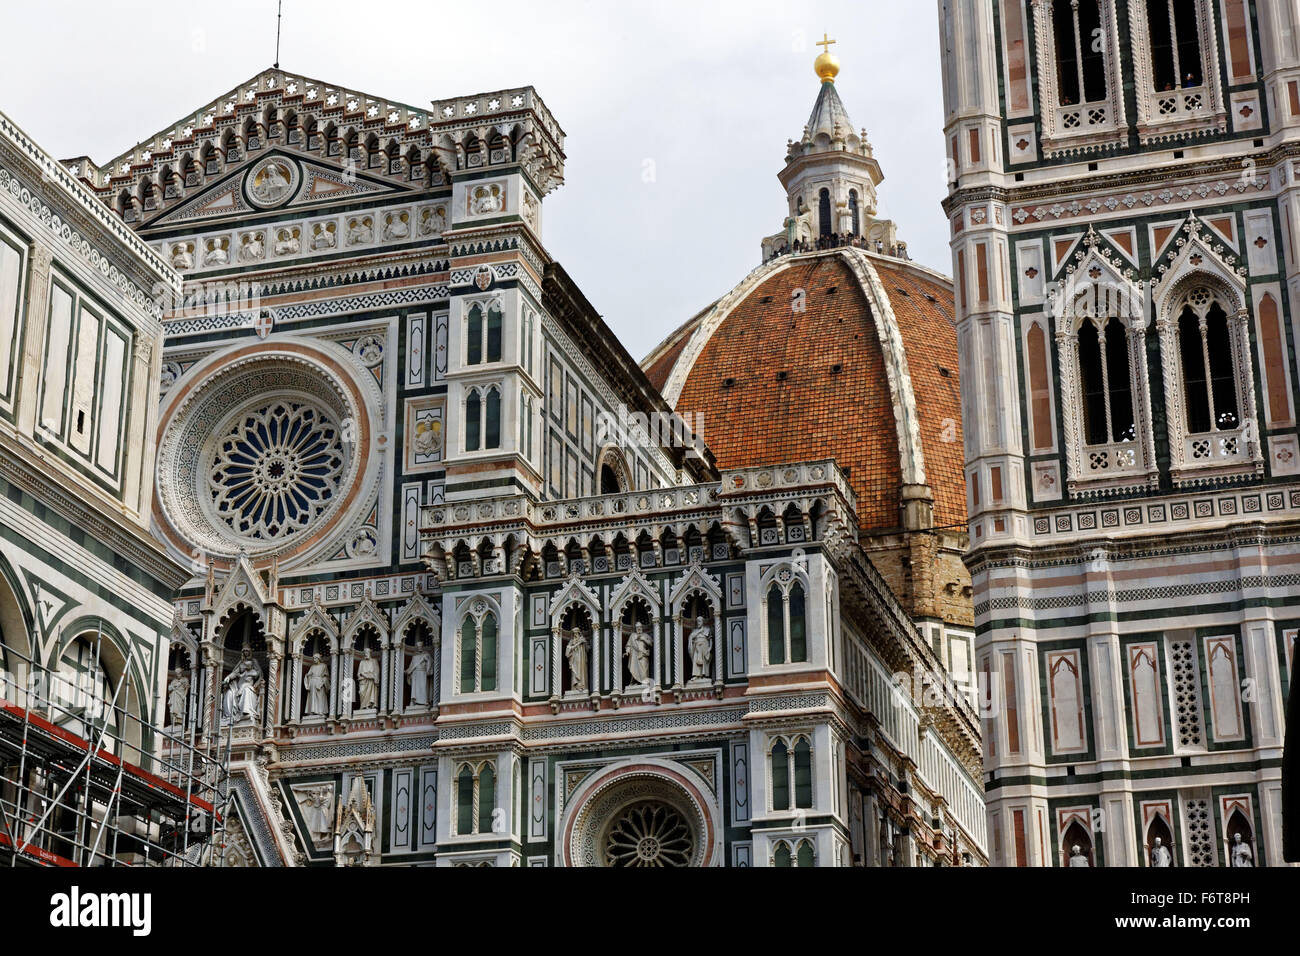 The Duomo behind the Cattedrale di Santa Maria del Fiore, or Cathedral of Saint Mary of the Flower dominates the skyline Stock Photo